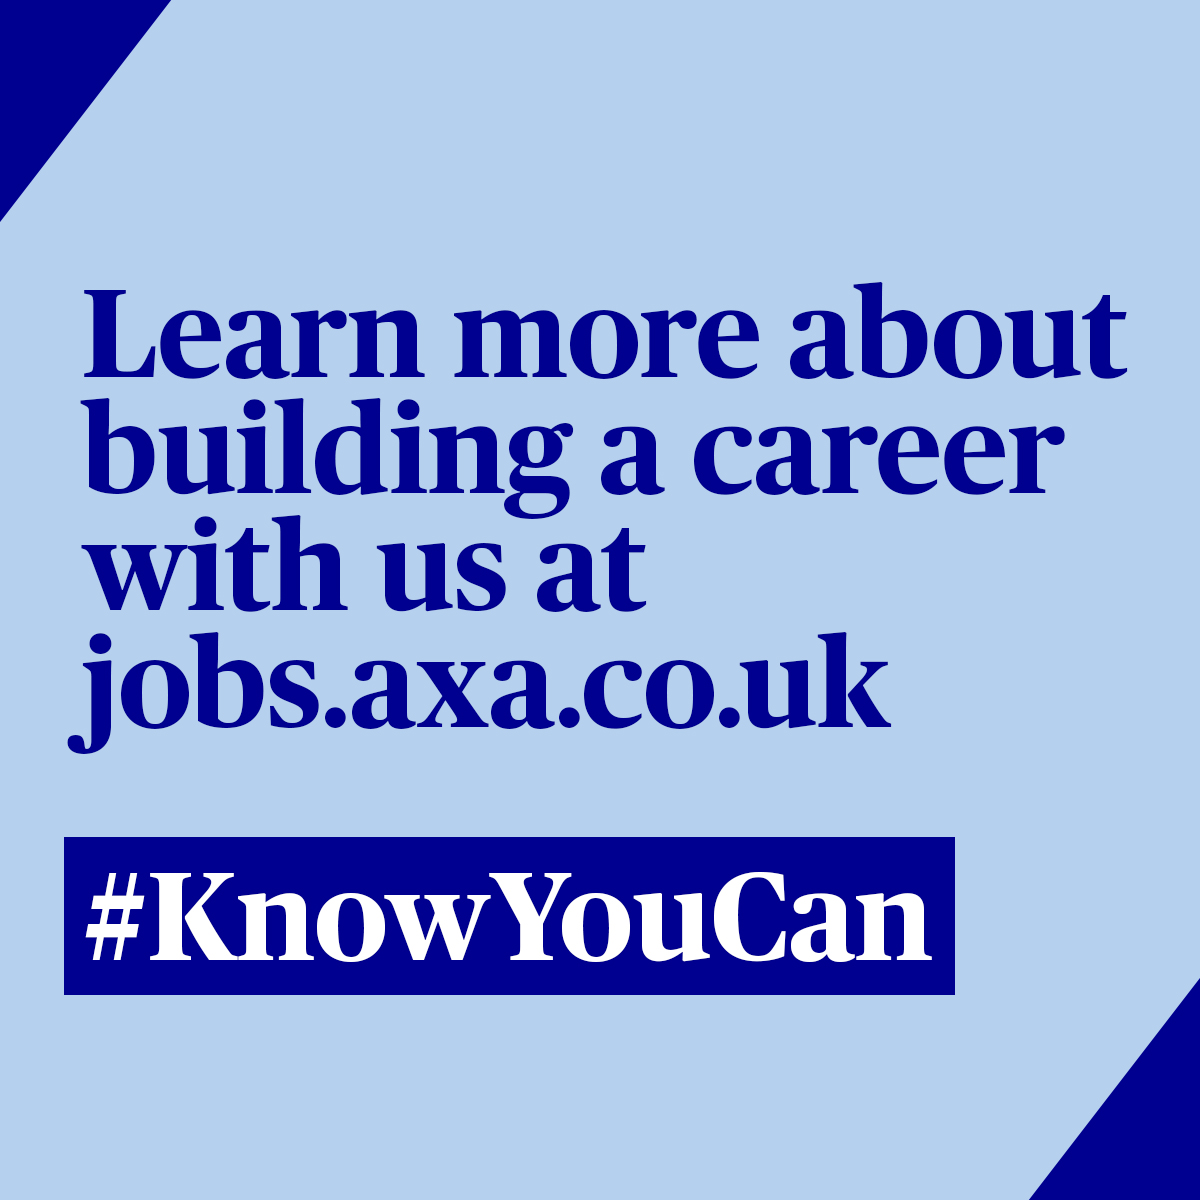 At AXA, you don’t always need specific experience to change up your career, just transferable skills and the drive to learn. That's how Ollie moved from the Complaints Team to Employee Relations. Read his full story here: bit.ly/43WNlDN #AXAUKCareers #KnowYouCan